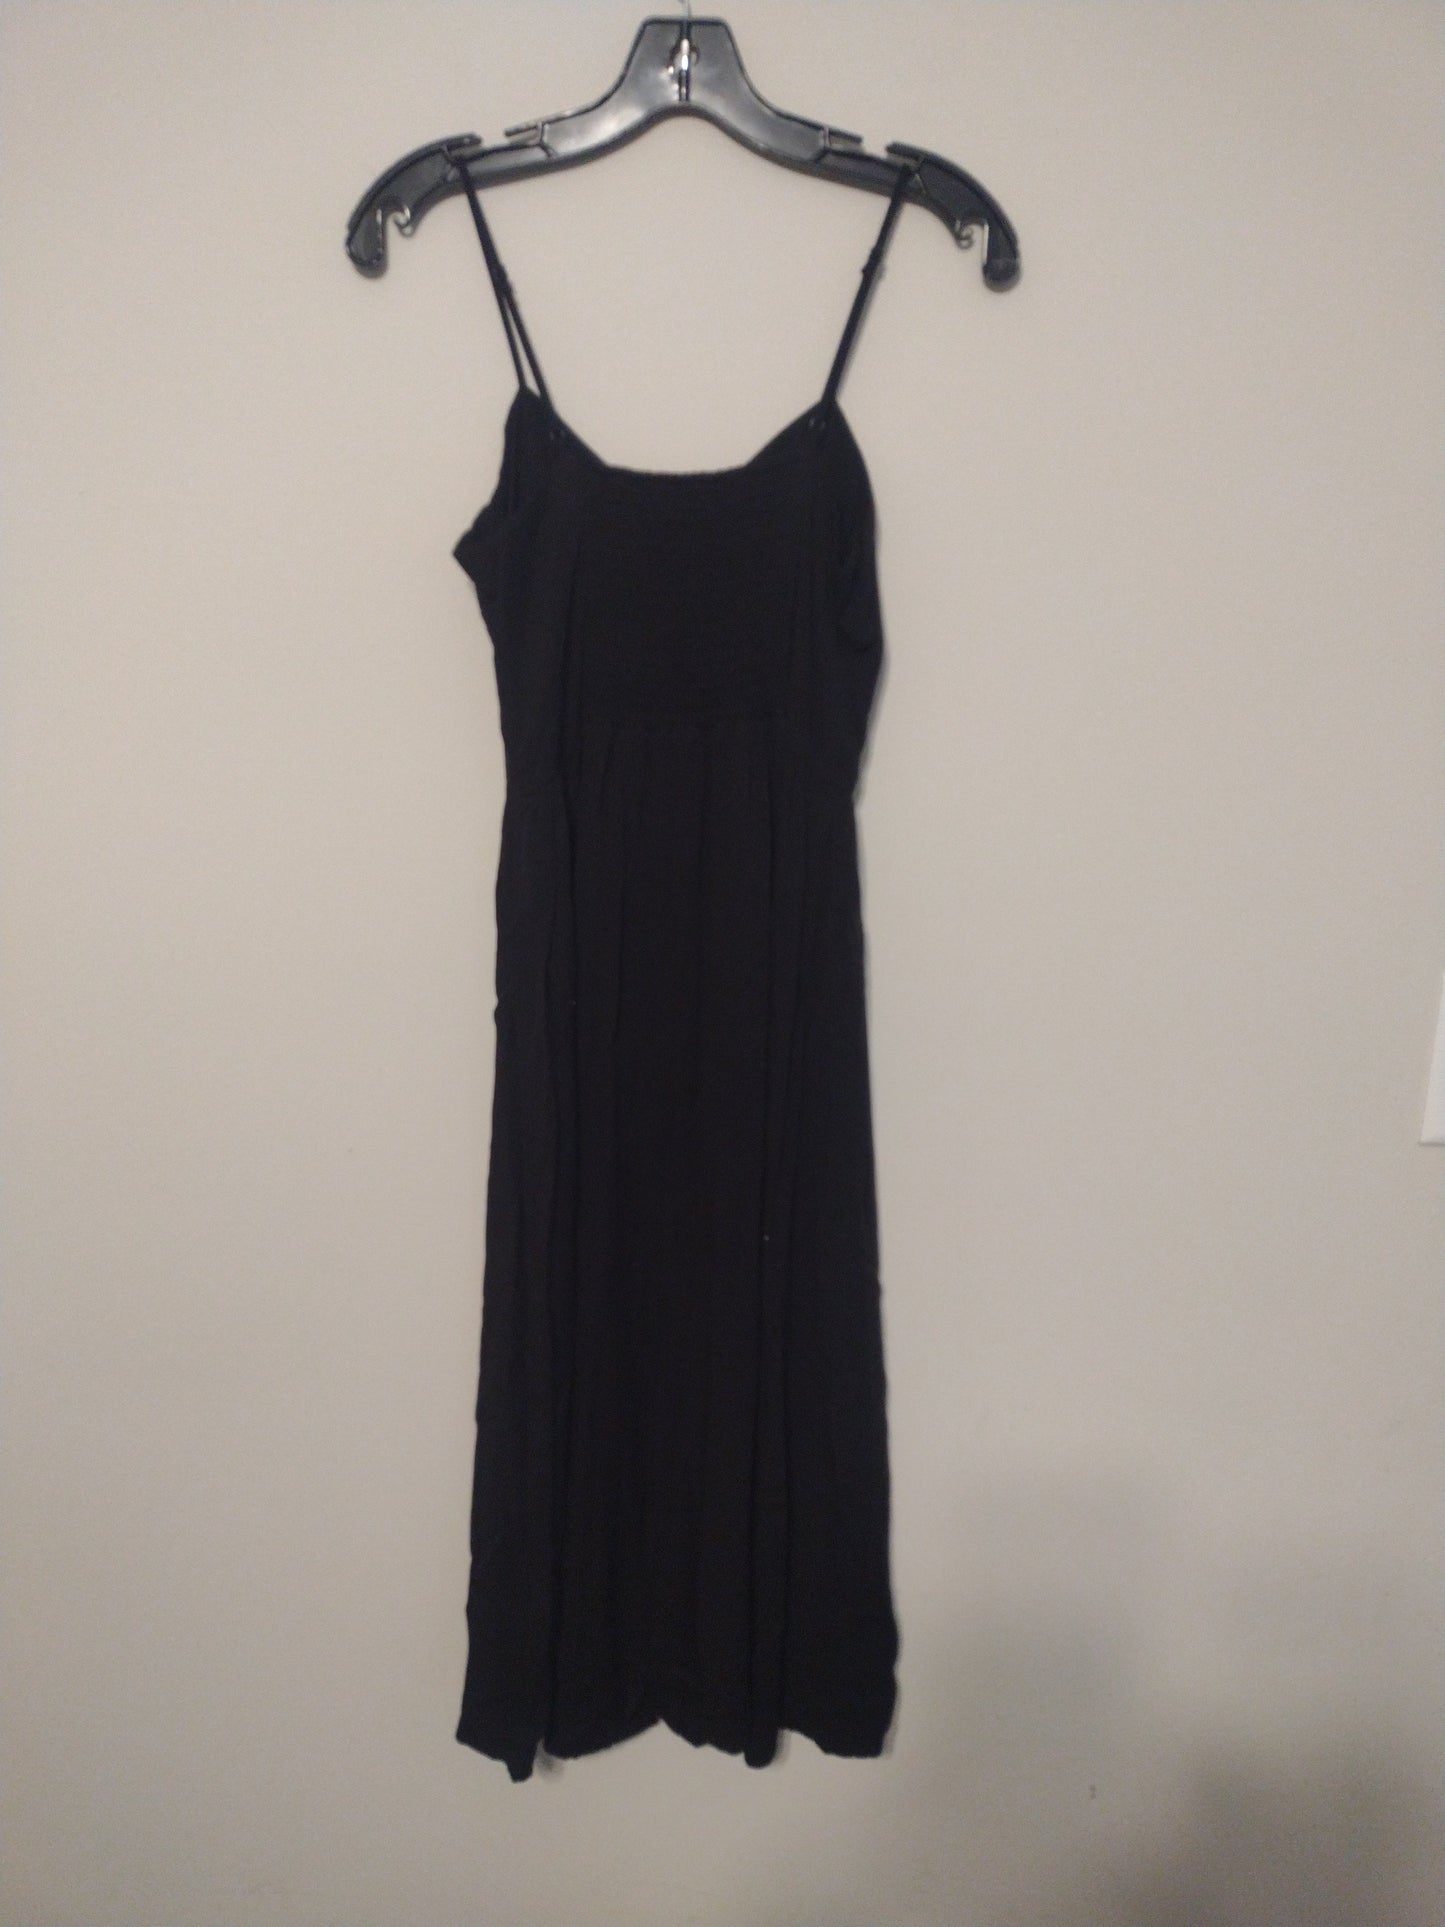 Dress Casual Midi By H&m  Size: M